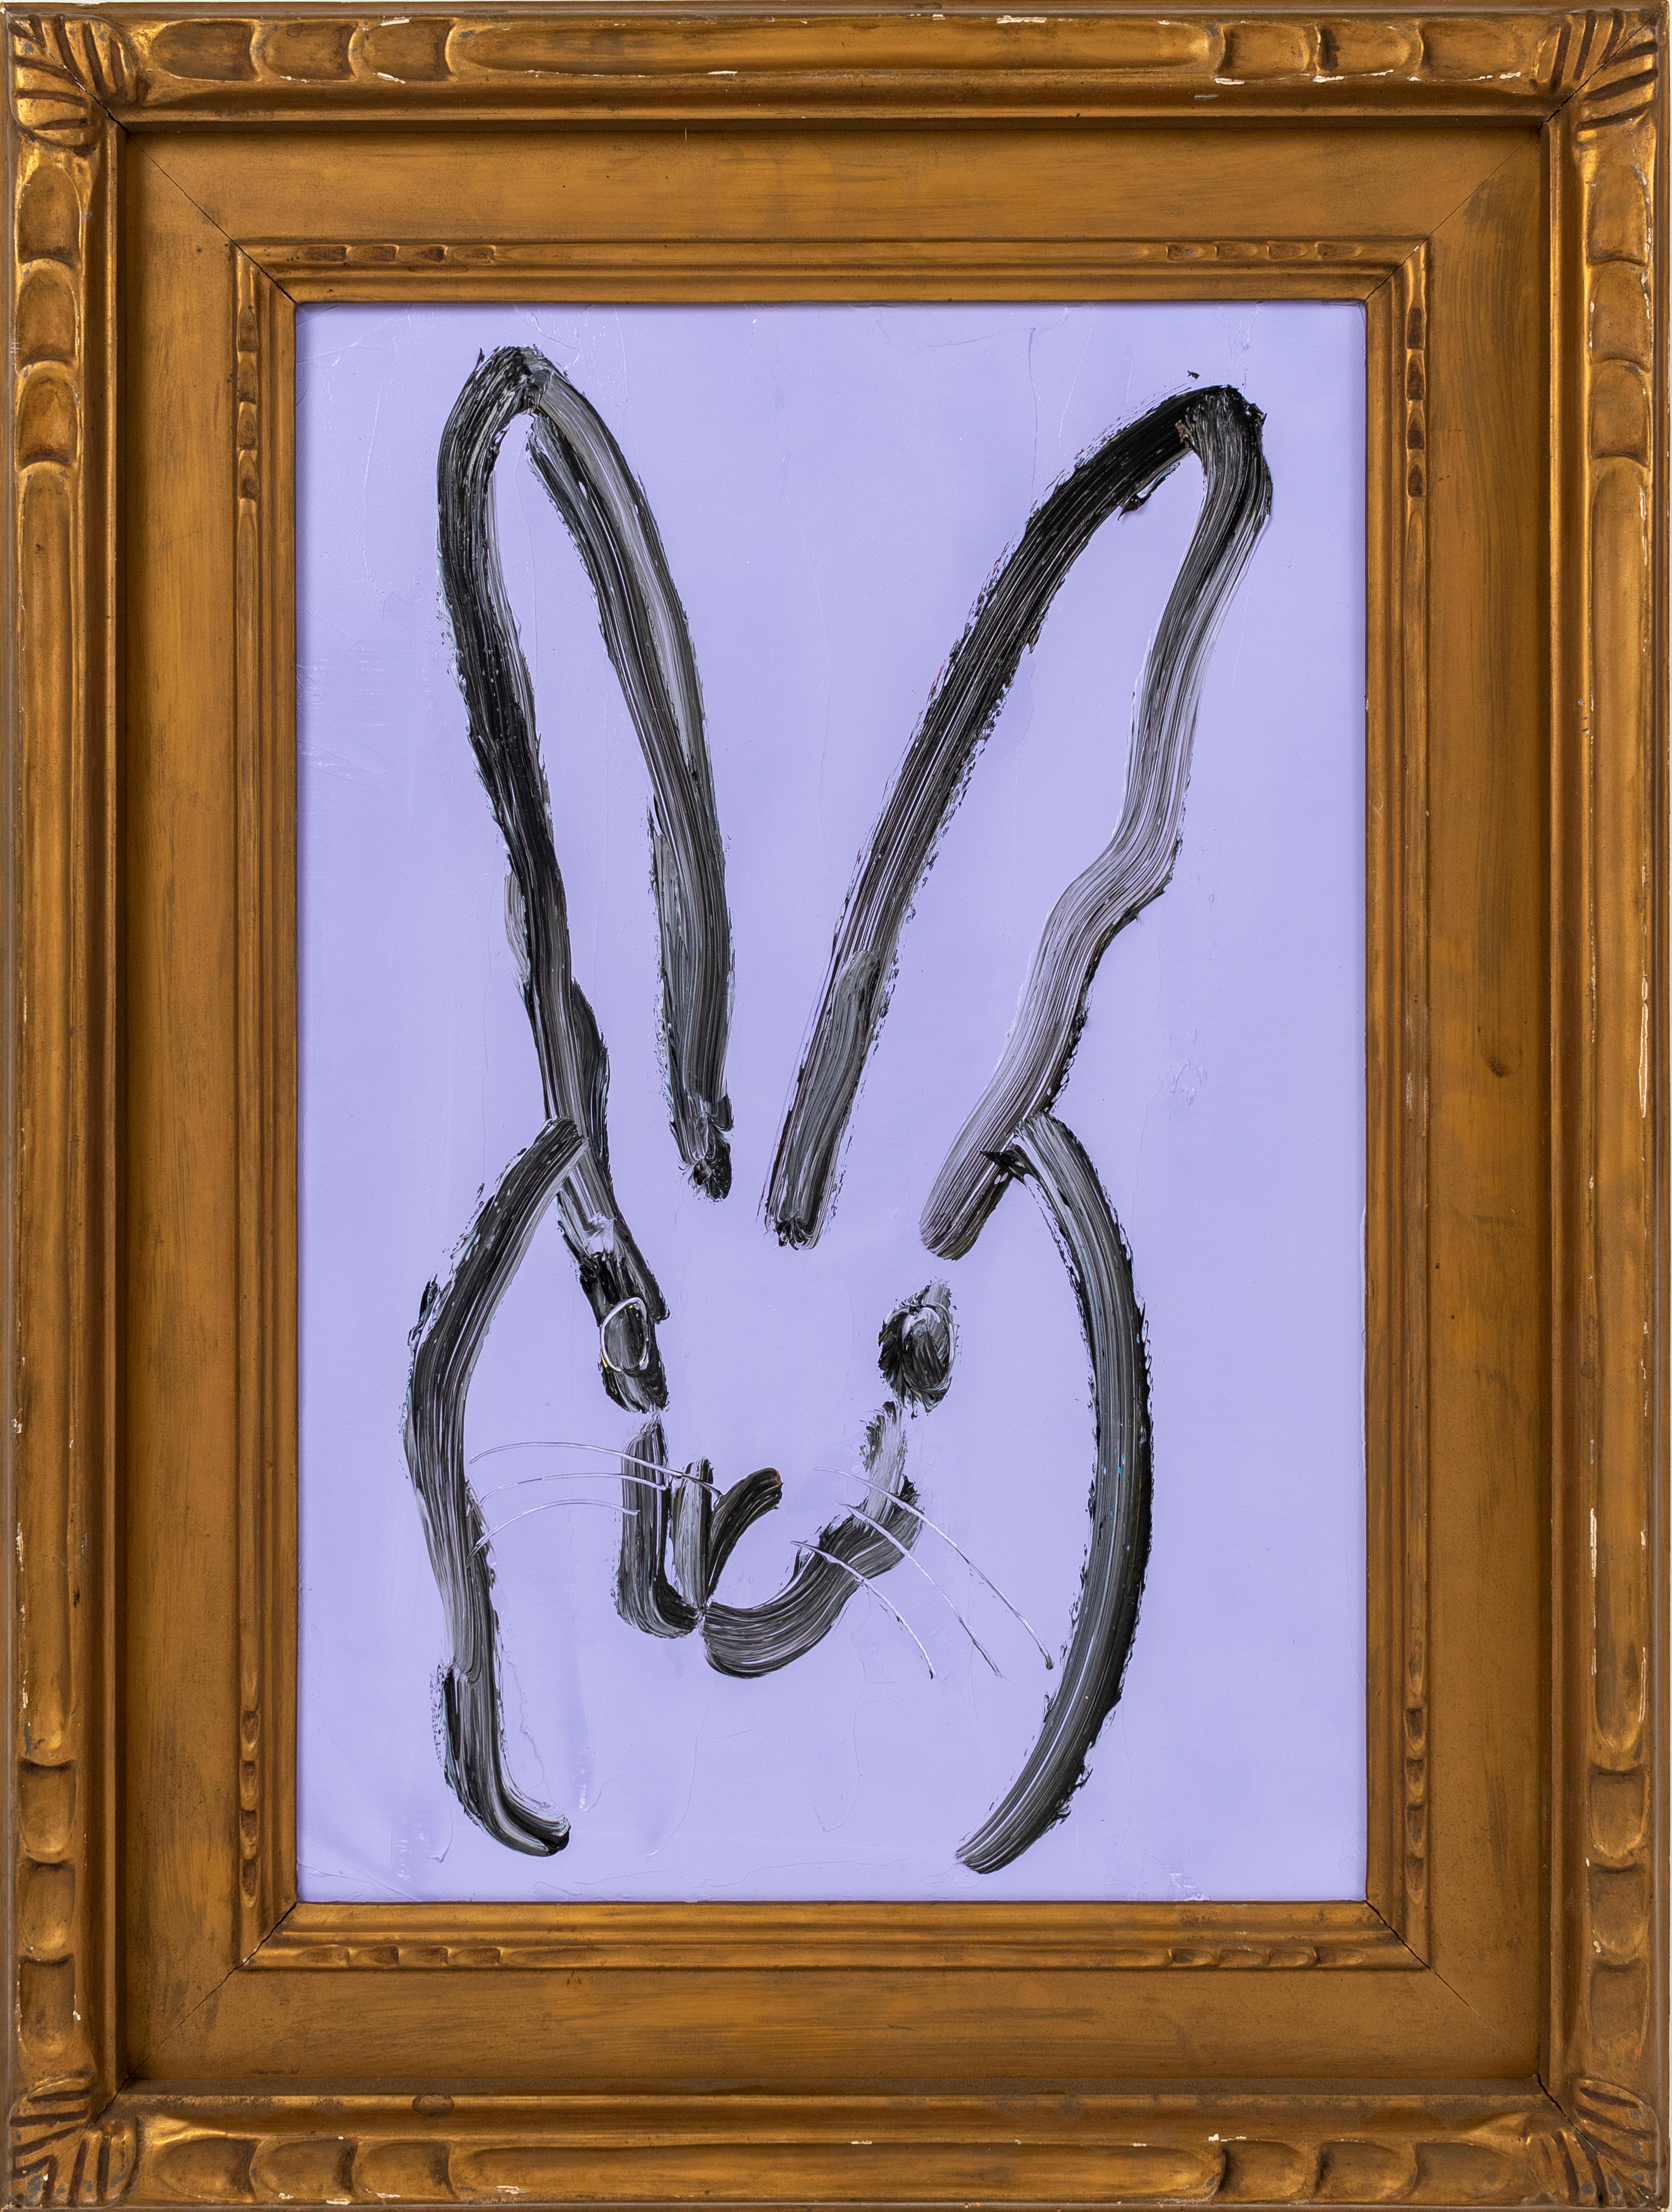 Painting dimensions: 18 x 12 inches
Framed dimensions: 24 x 18 inches
This framed, lavender, solo gestural bunny by renowned and prolific Neo-Expressionist Hunt Slonem is framed in one of Hunt's signature vintage frames. 
New York painter, Hunt